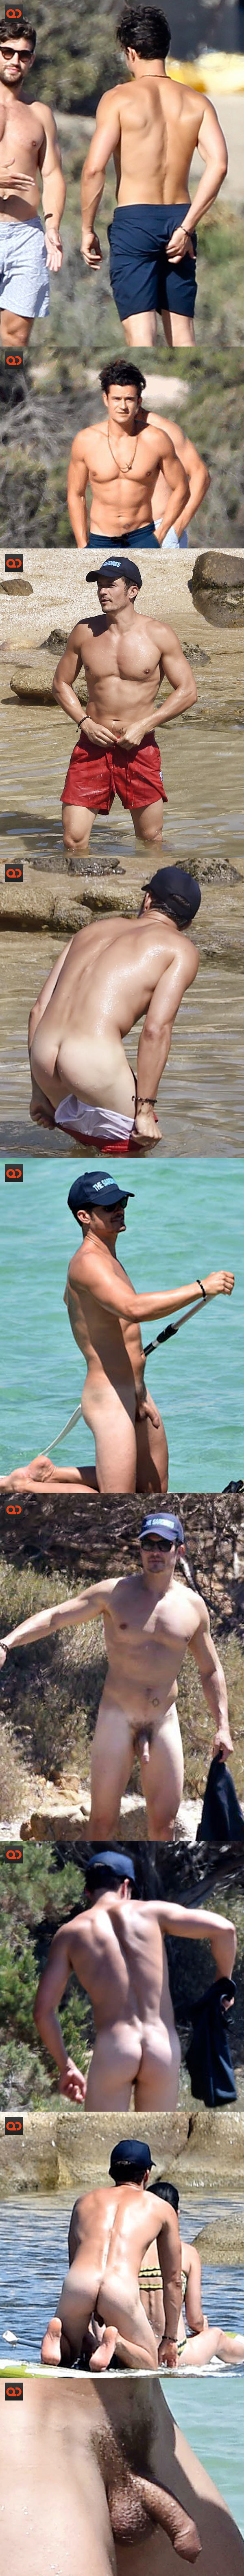 Orlando Bloom Ballsy New Photos! More Uncensored Images Of His Balls And Butt Surface